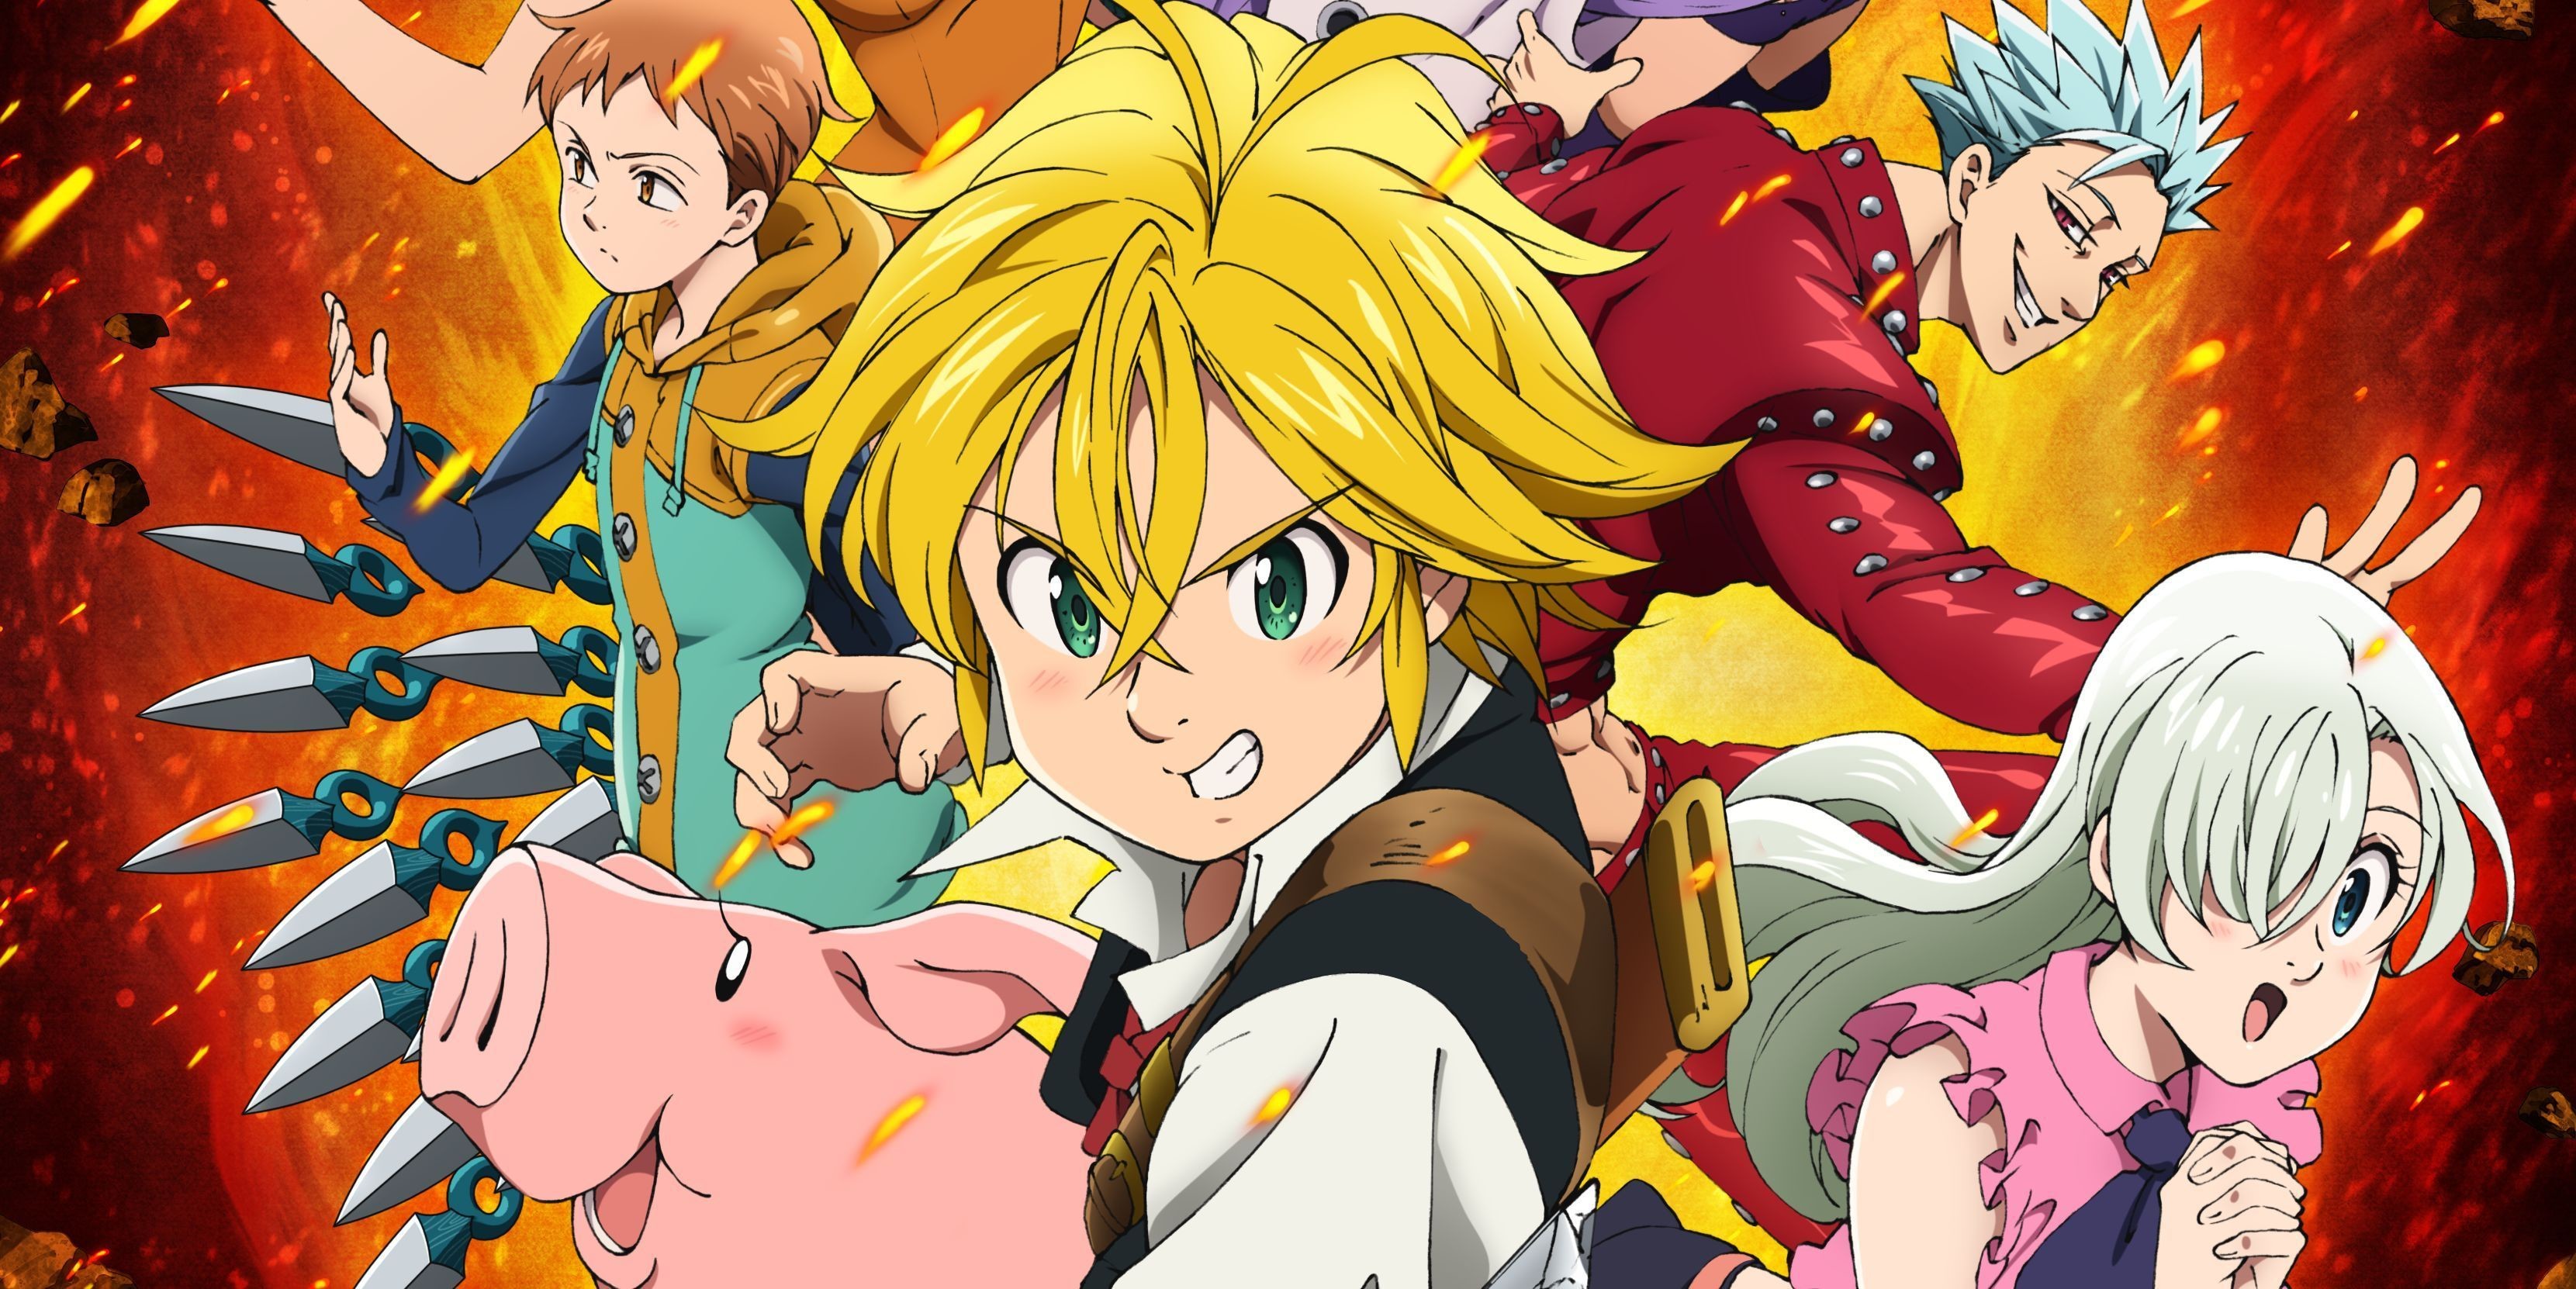 Wallpaper ID 426627  Anime The Seven Deadly Sins Phone Wallpaper Meliodas  The Seven Deadly Sins 800x1280 free download